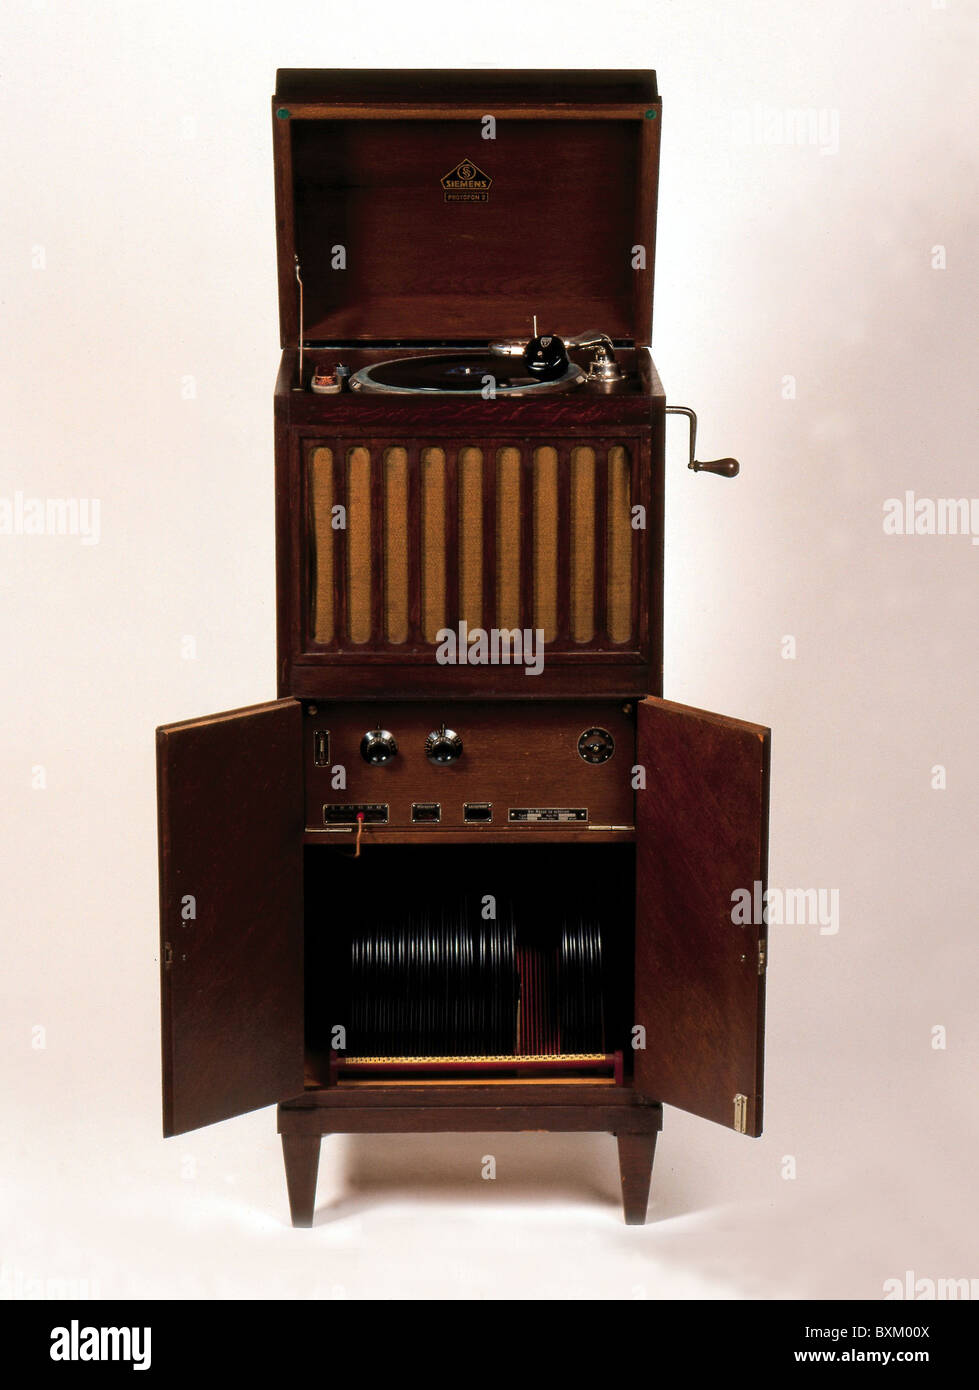 broadcast, radio, combined radio set and gramophone chest Siemens Protofon 2, Germany, 1929/1930, 1930s, 30s, 20th century, historic, historical, radio set Rfe 27, record, records, multimedia, record player, record players, audio, radio set, radio, radio sets, radios, home electronics, consumer electronics, entertainment electronics, home entertainment, studio shot, 1920s, Additional-Rights-Clearences-Not Available Stock Photo